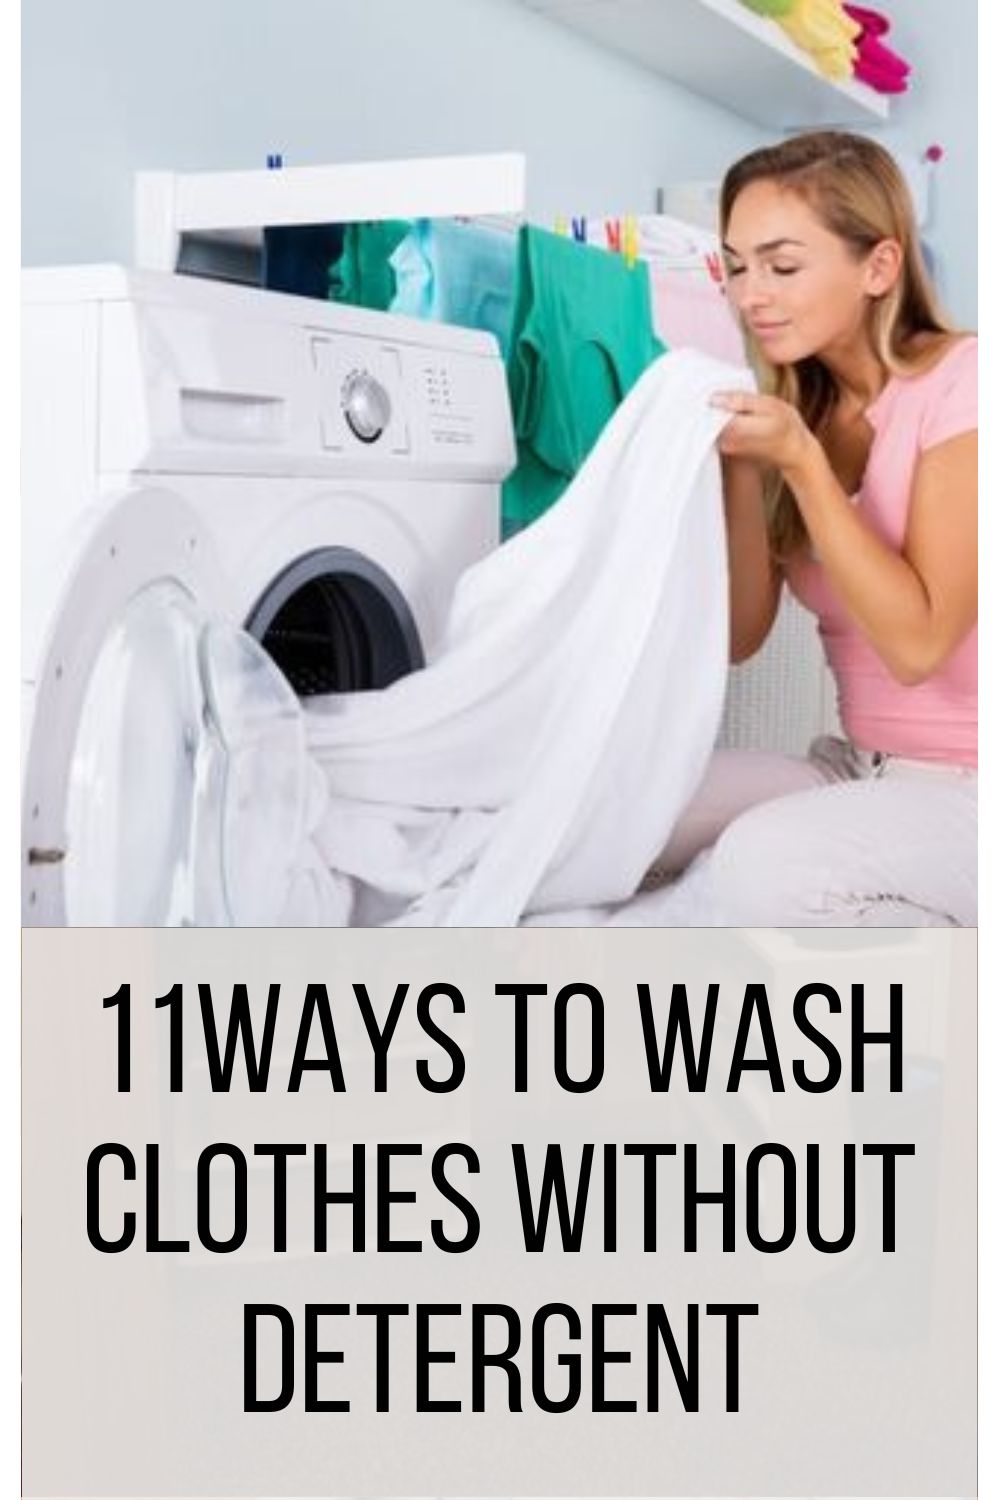 10 Ways to Wash Clothes Without Detergent